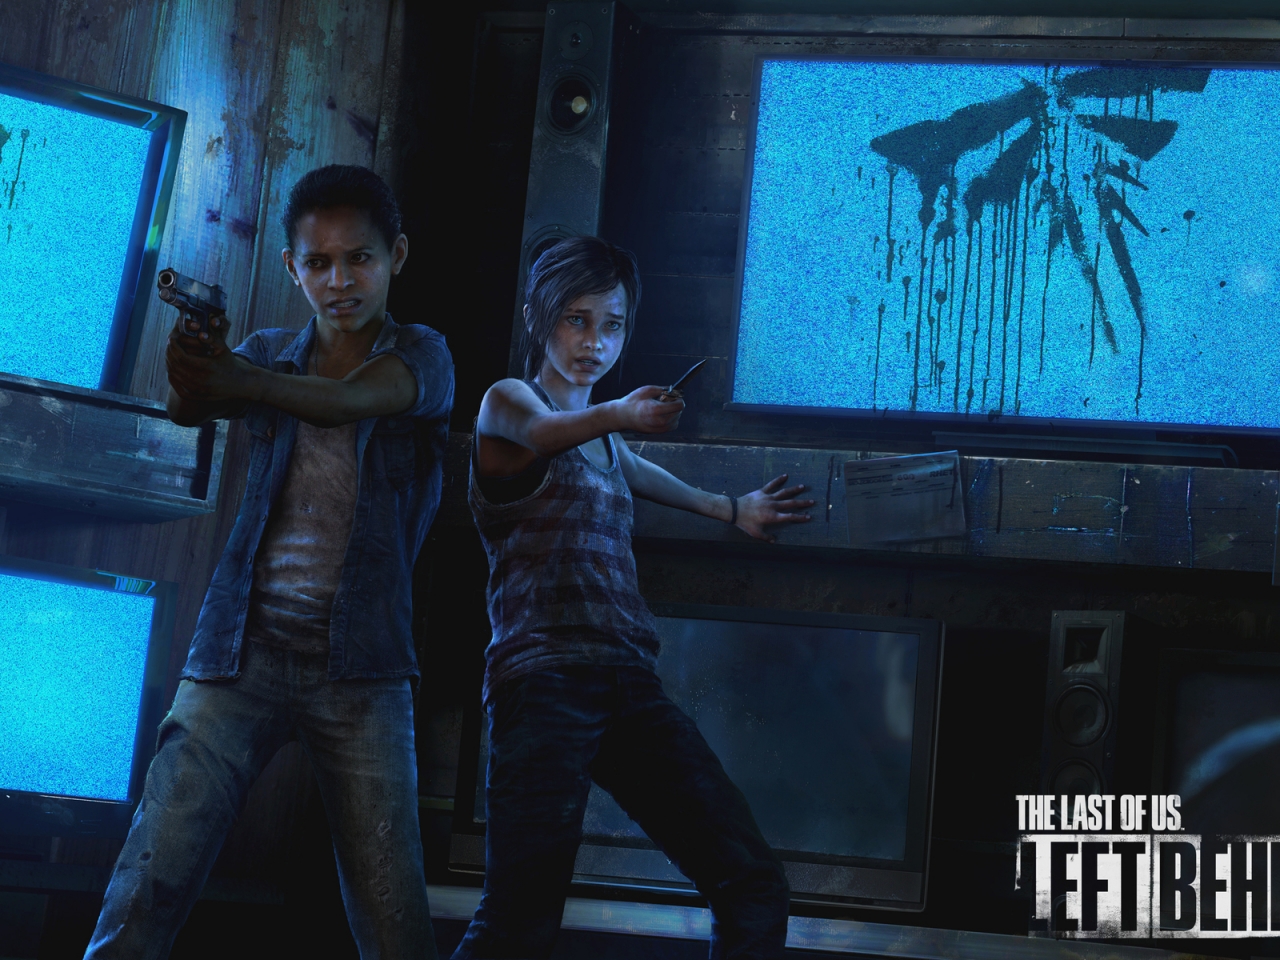 The Last Of Us Left Behind for 1280 x 960 resolution